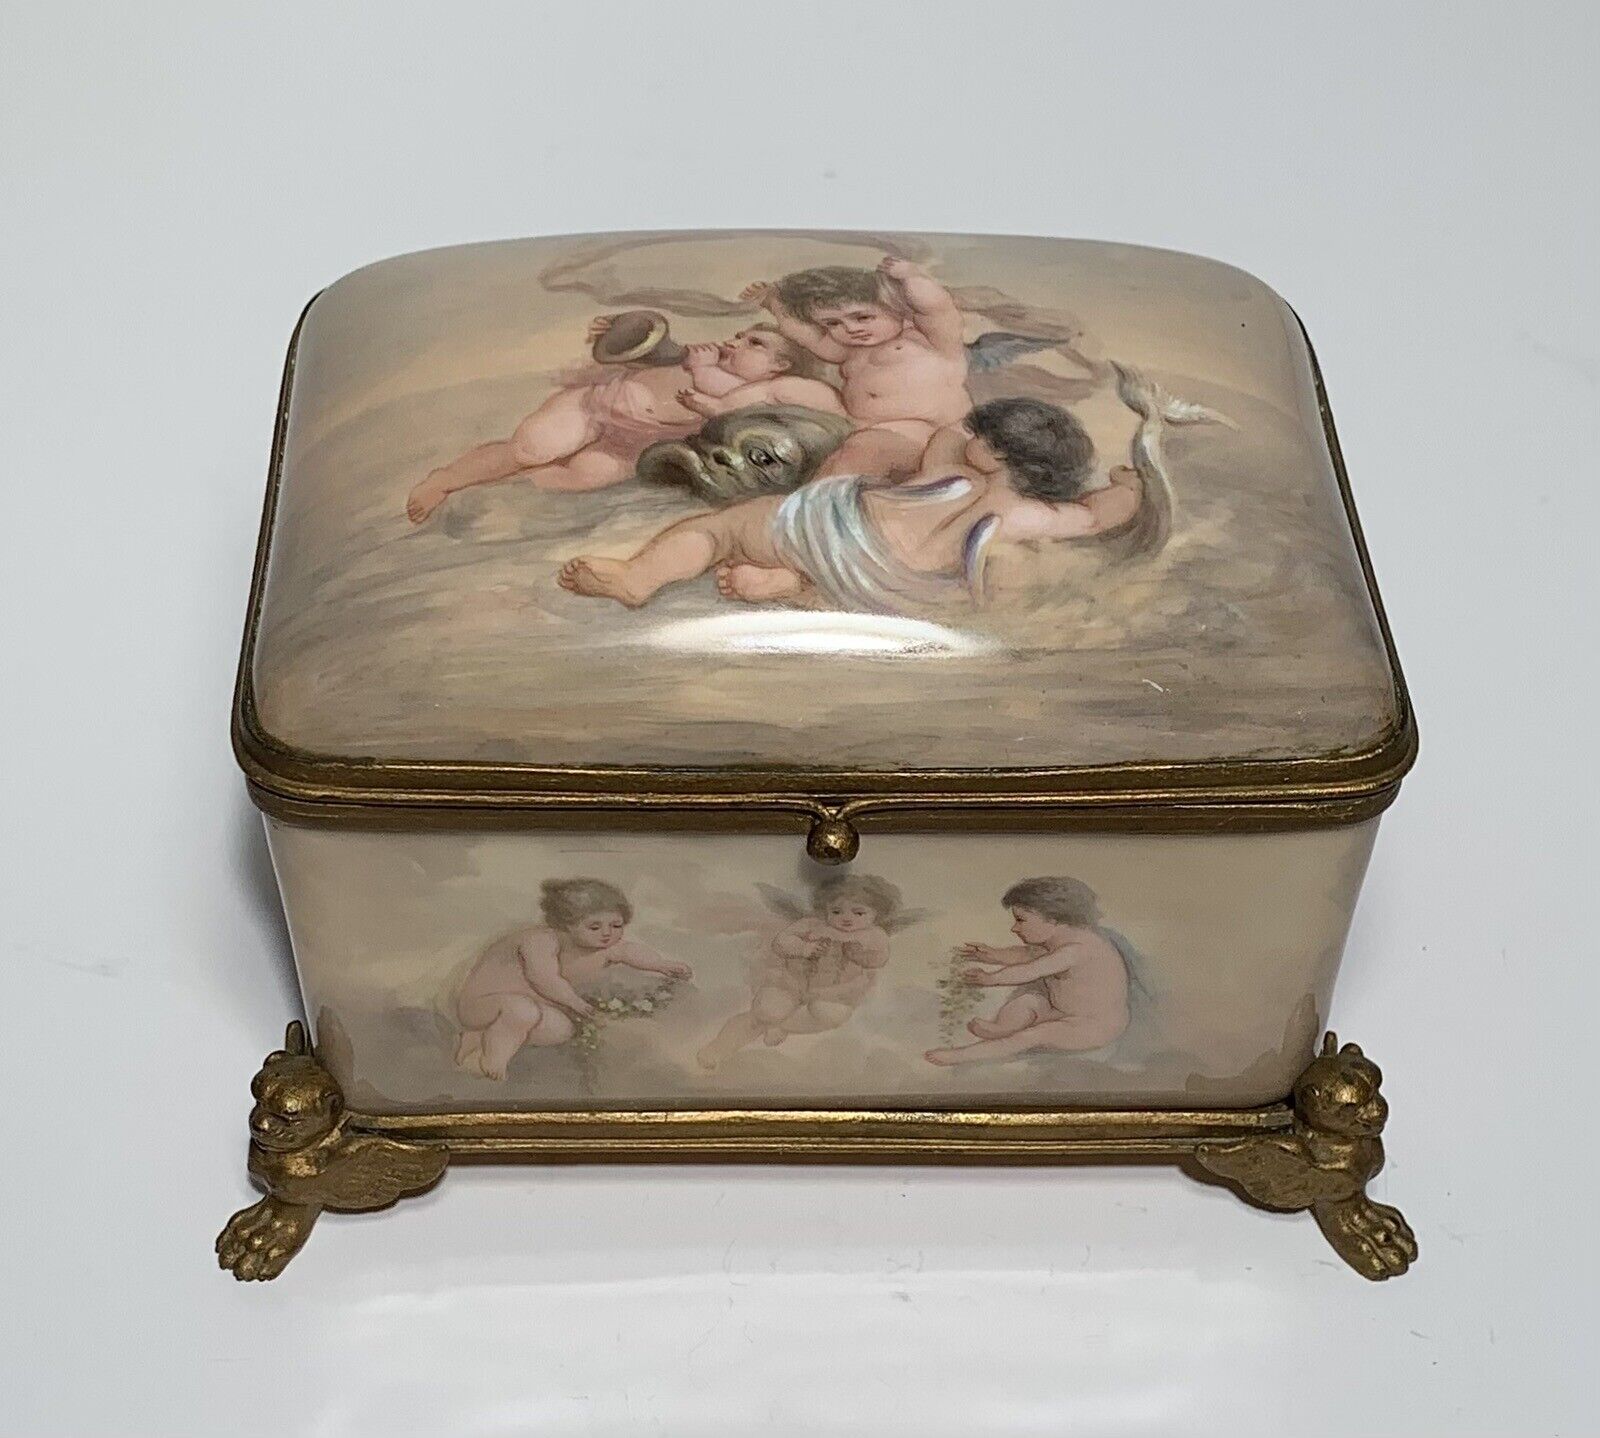 Antique CHERUBS PUTTI HAND PAINTED PORCELAIN BOX BRONZE MOUNTED GERMAN FRENCH